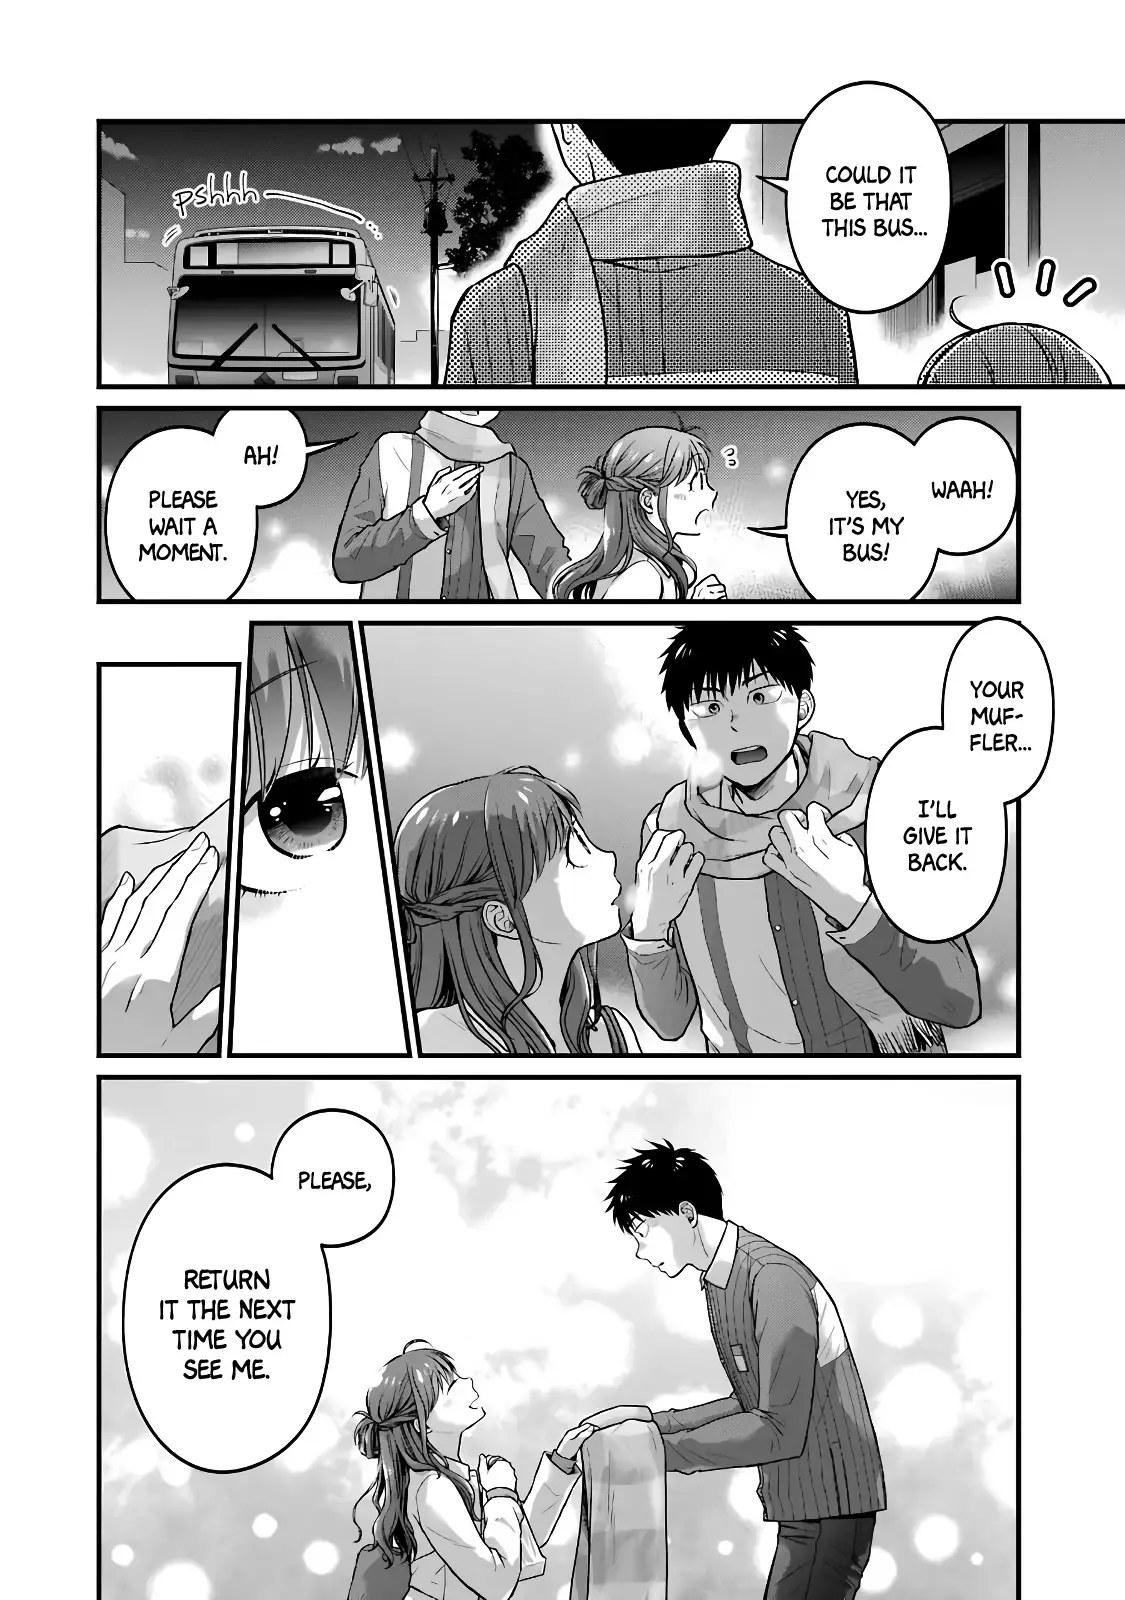 5 Minutes With You At A Convenience Store - 65 page 6-47fb9710